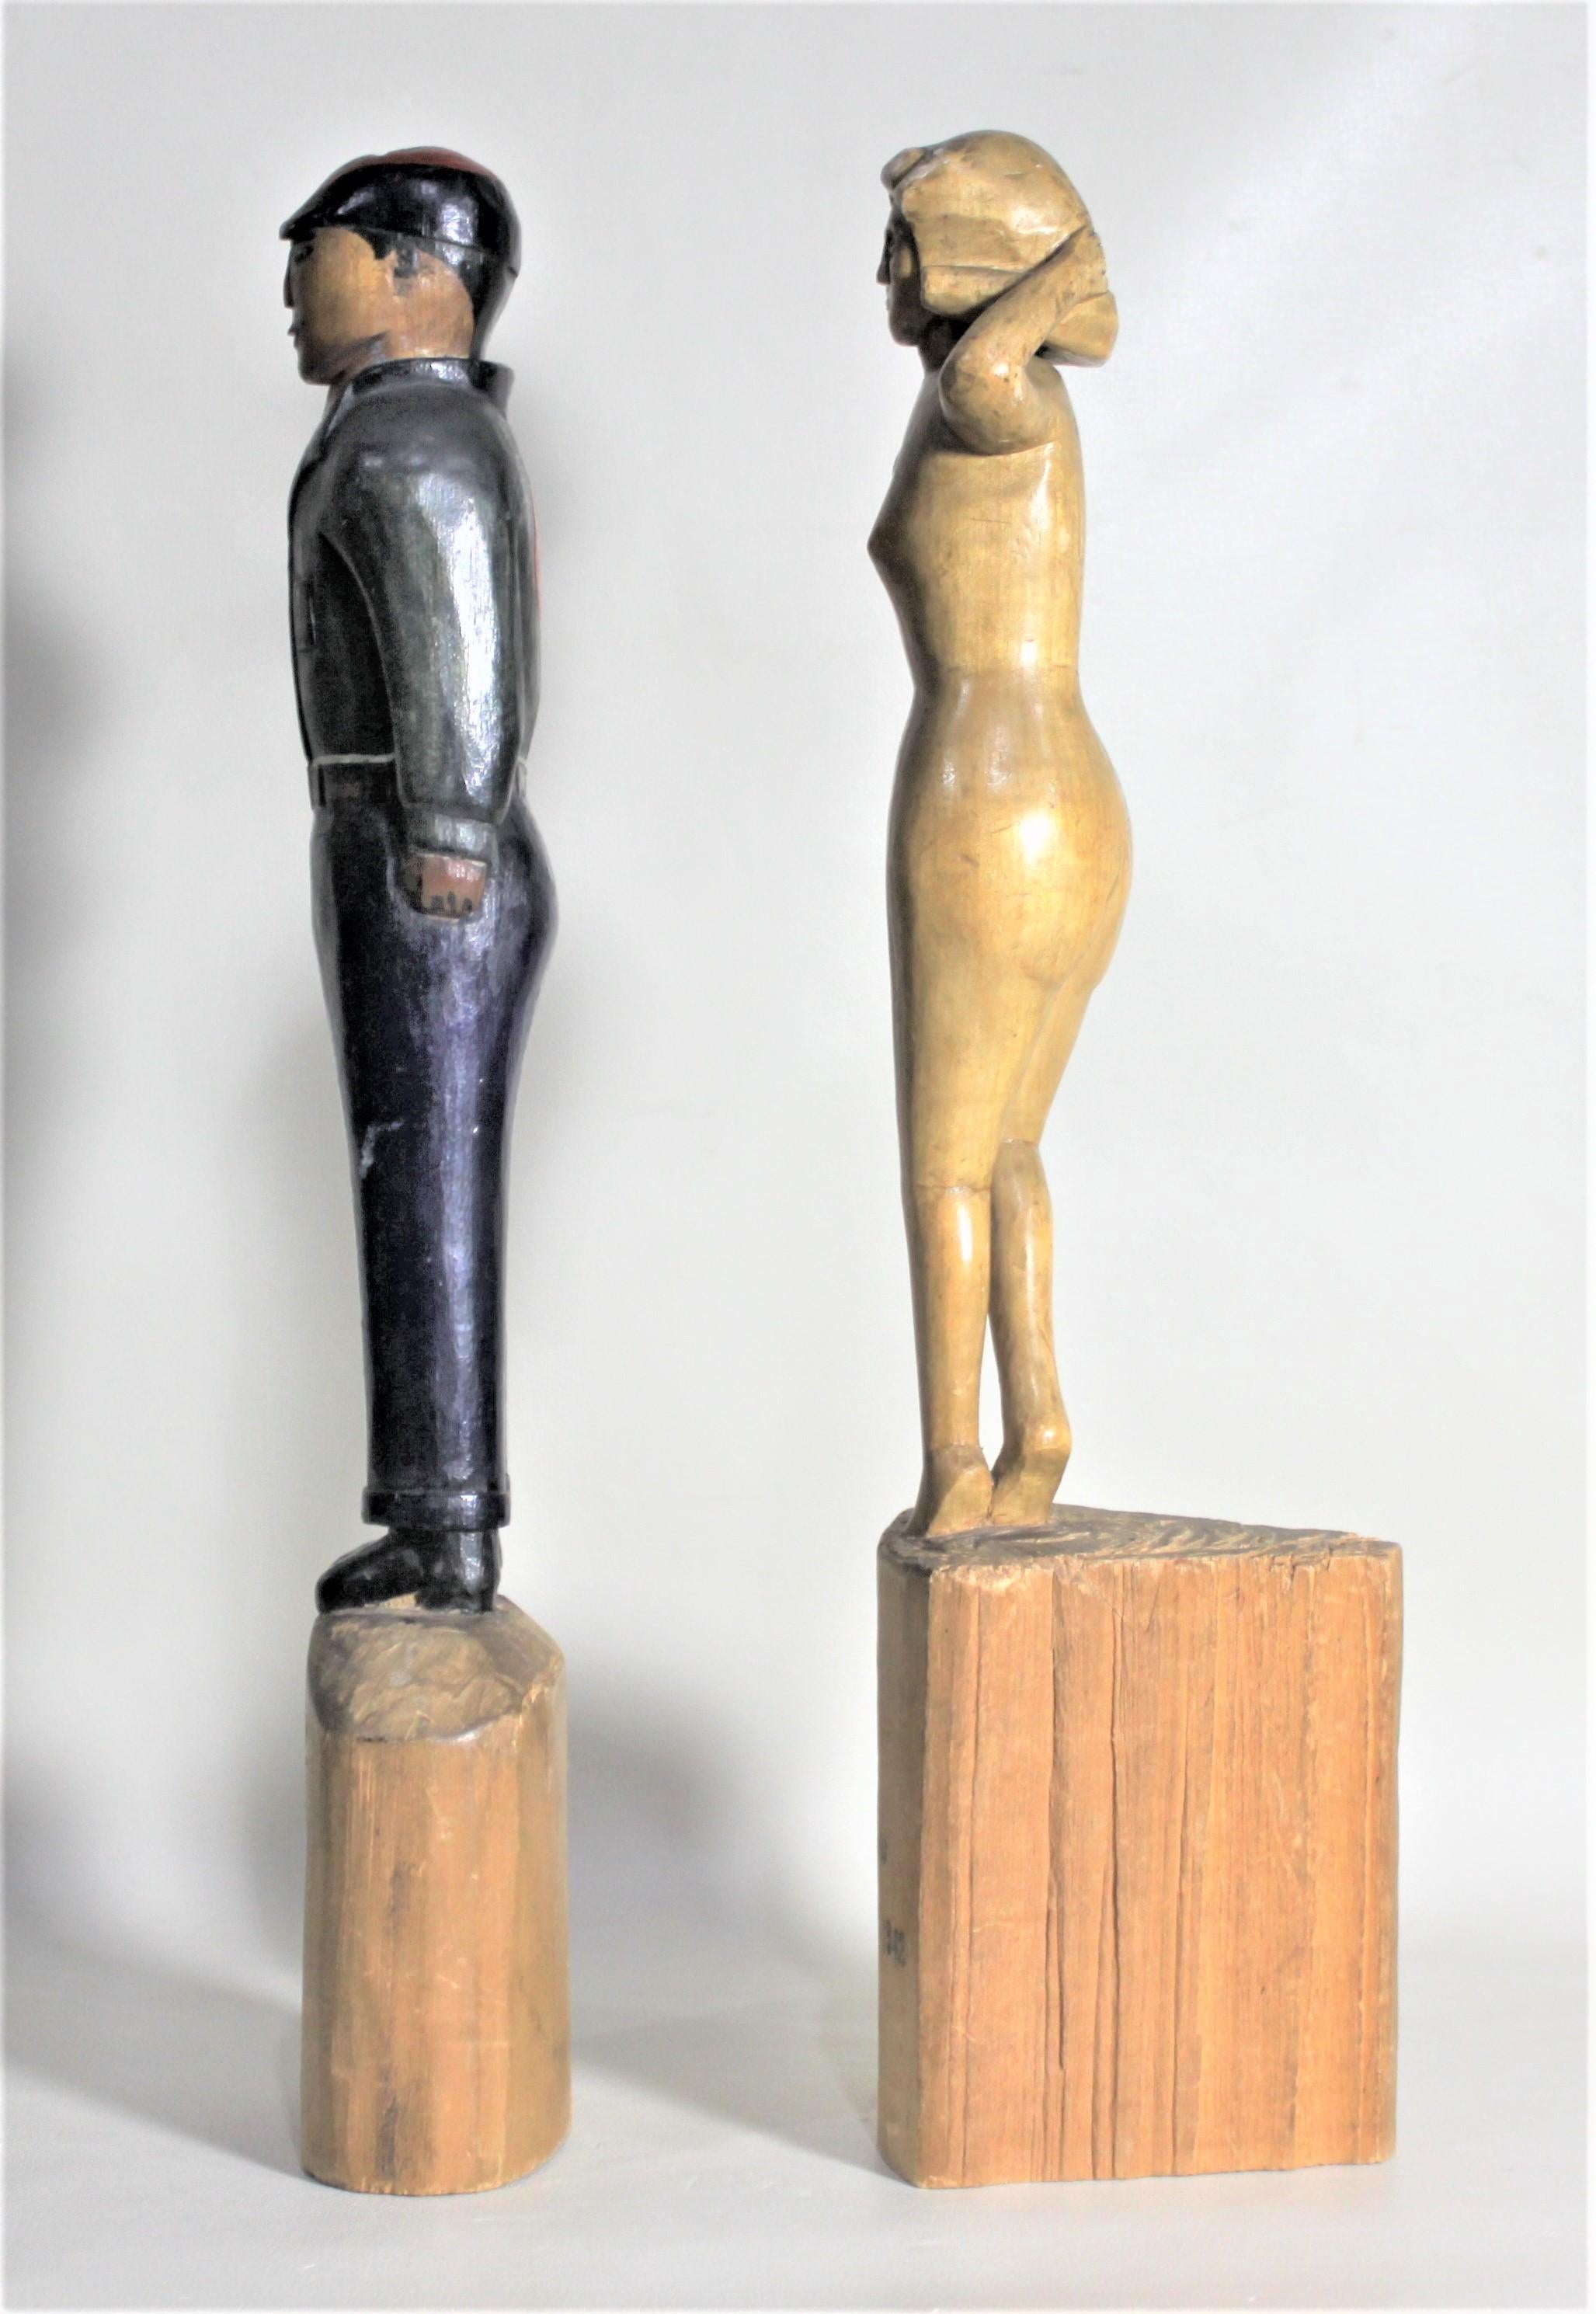 20th Century Pair of Canadian Folk Art Carved Japanese Internment Camp Figures or Sculptures For Sale